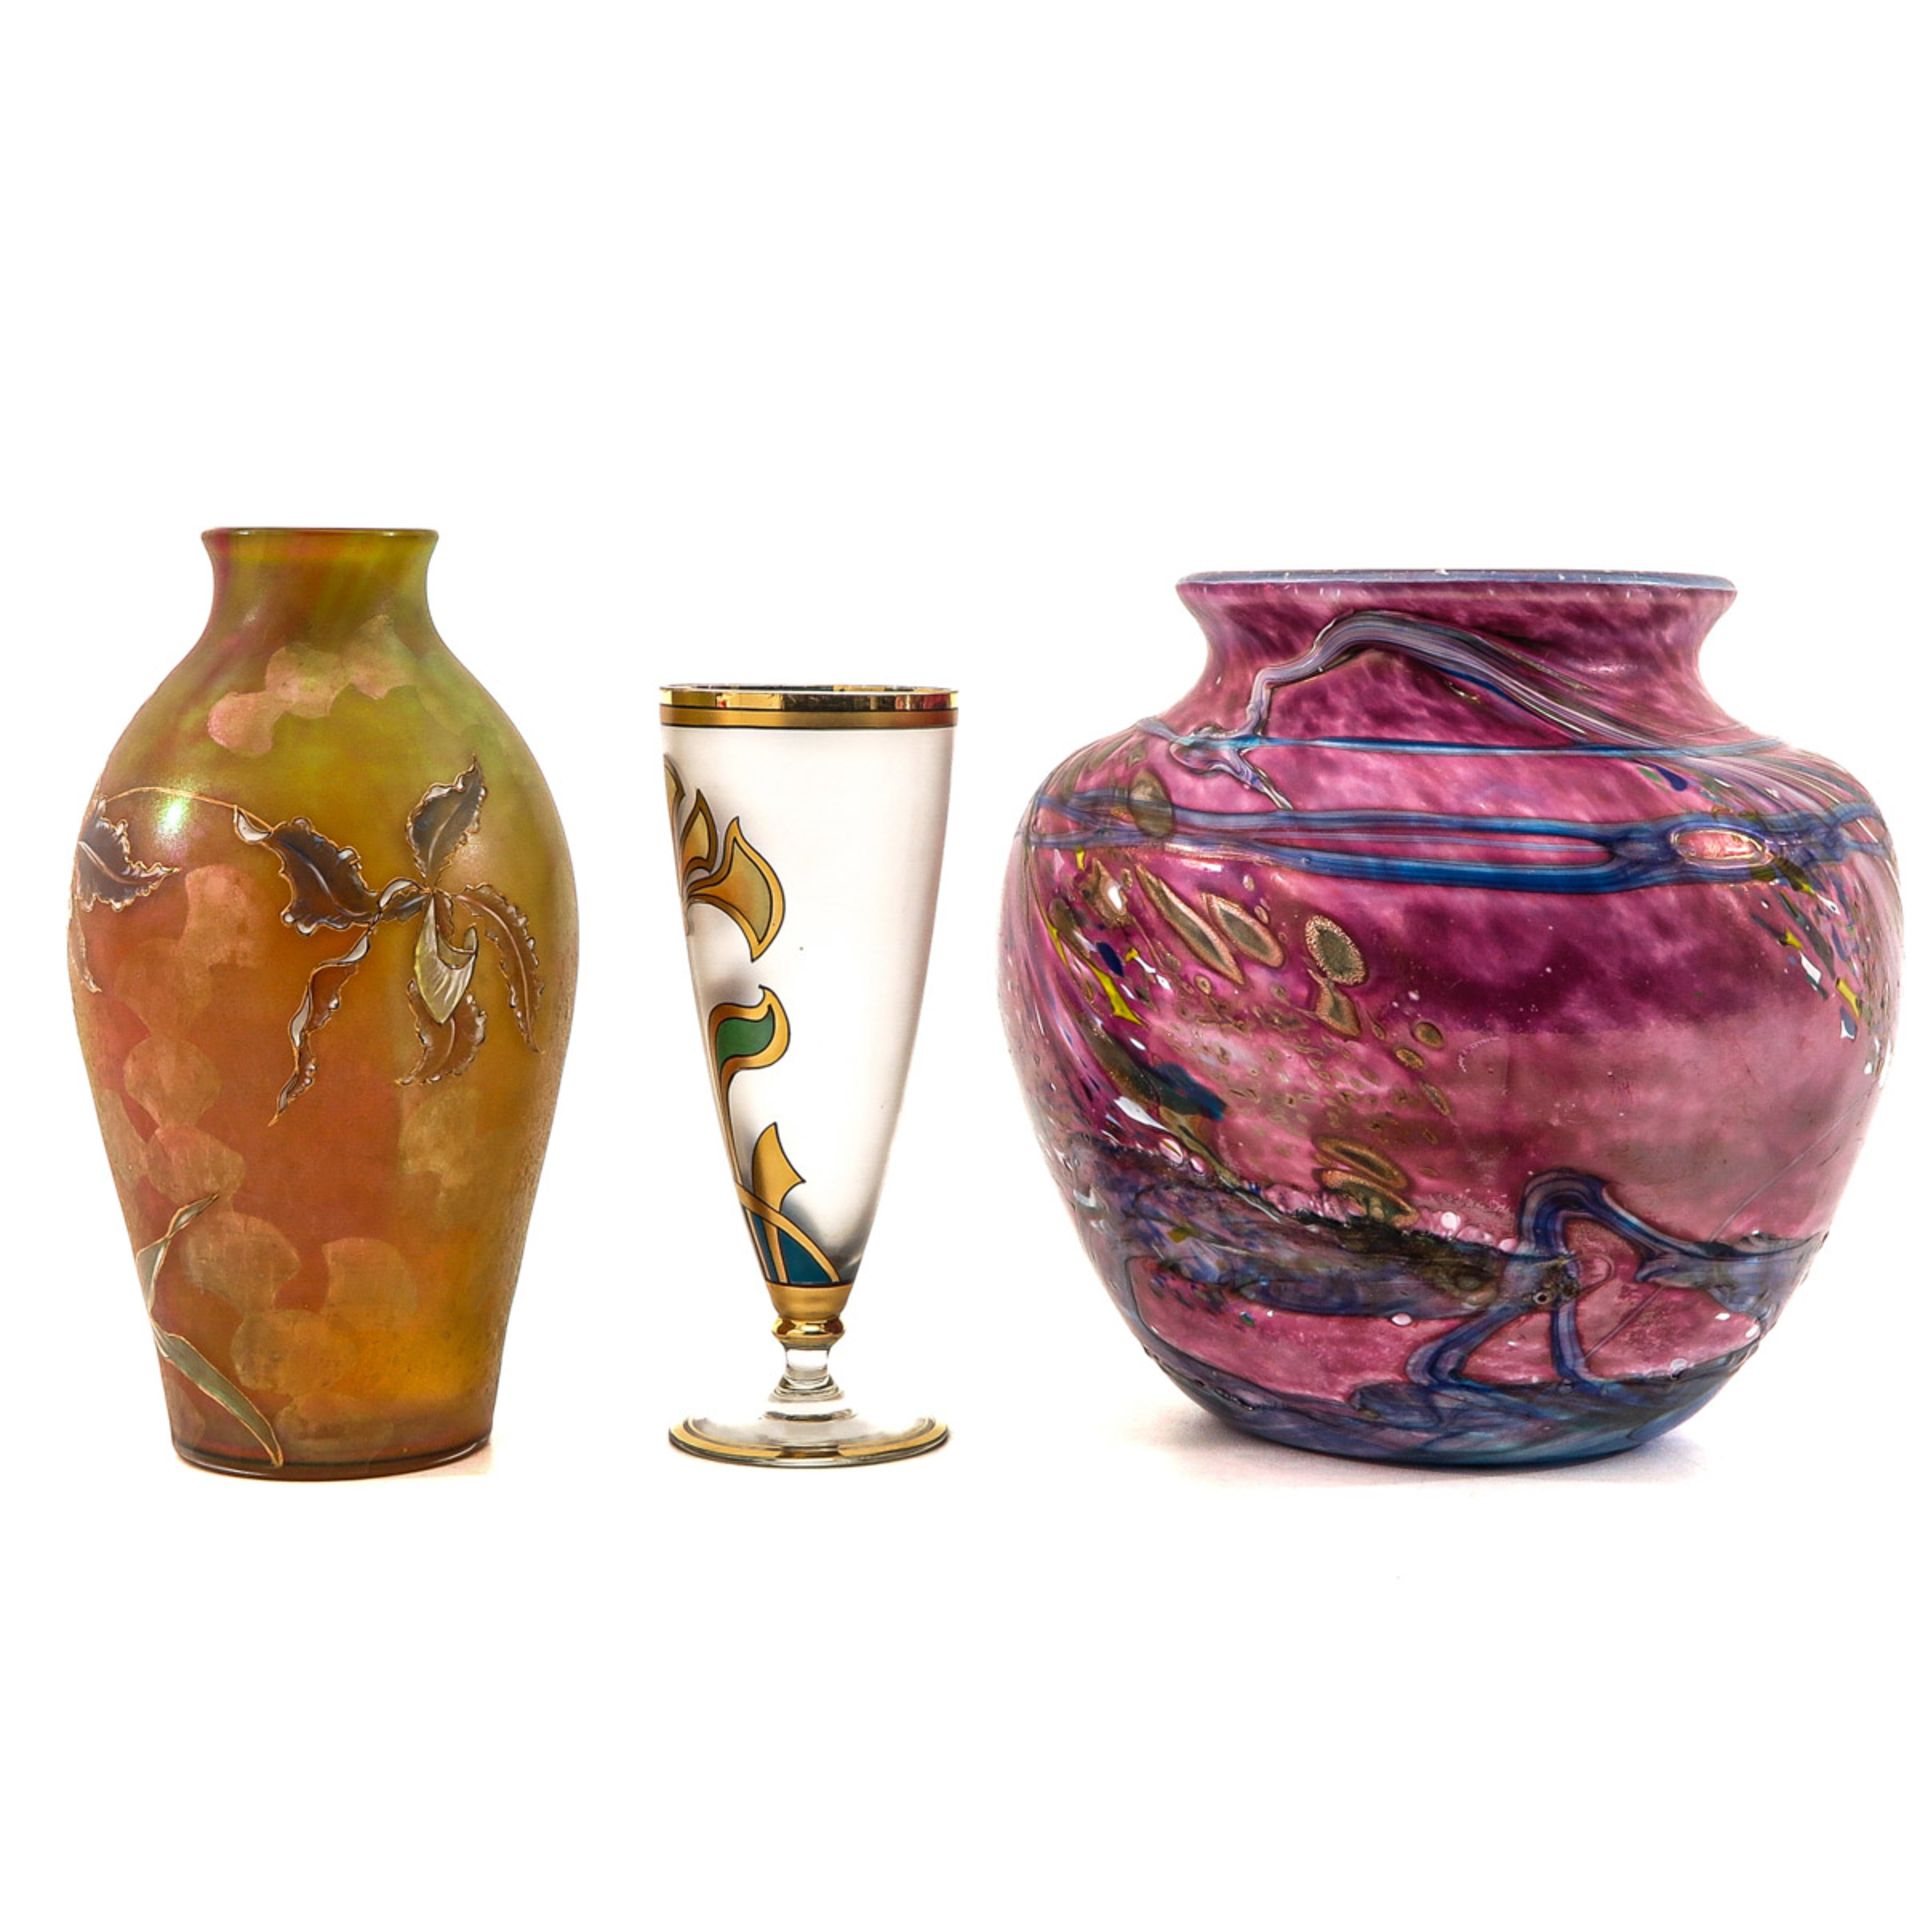 A Collection of 3 Vases - Image 2 of 9